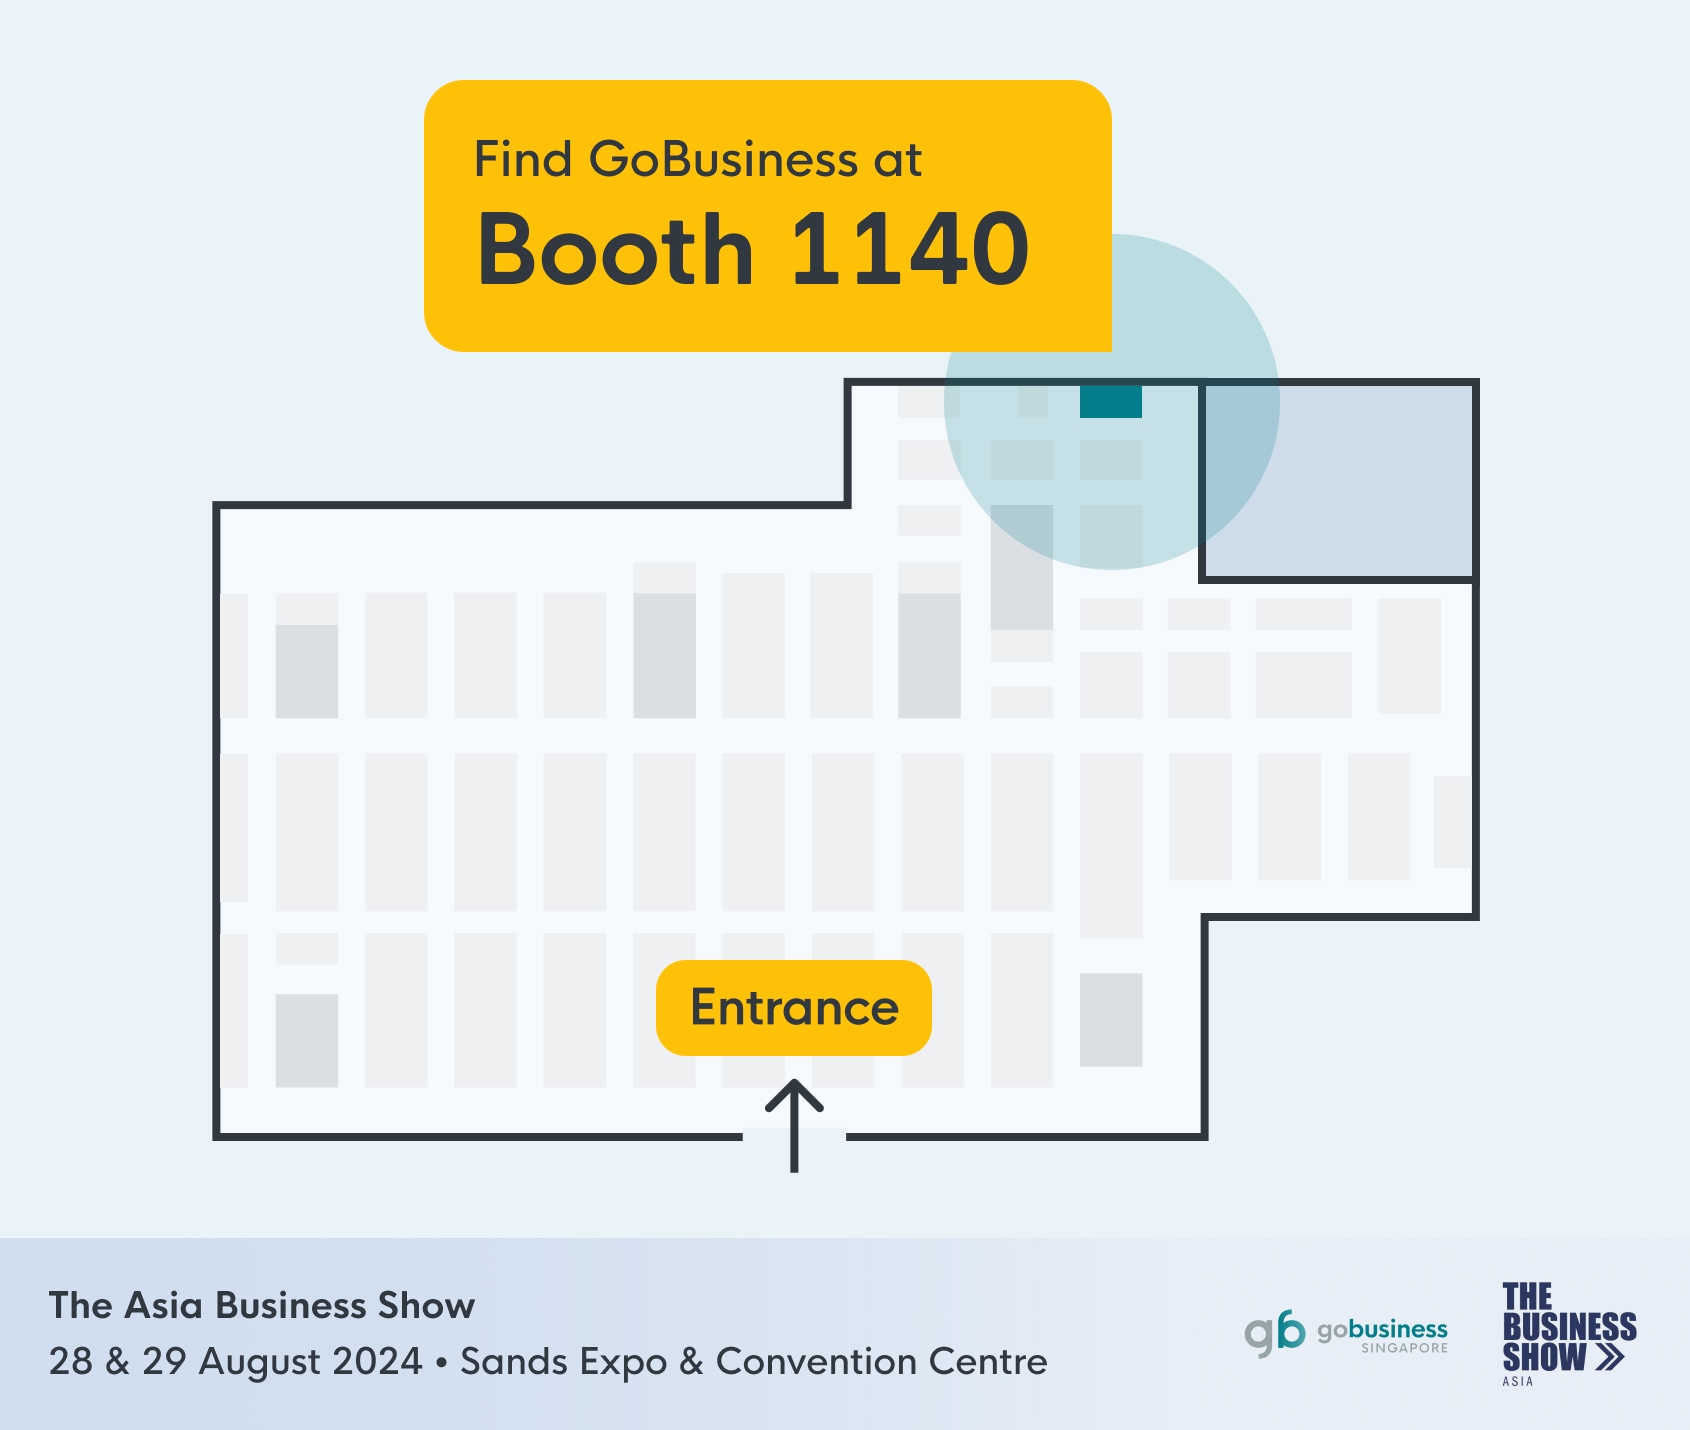 Find GoBusiness at Booth 1140, in the top right corner of the venue.